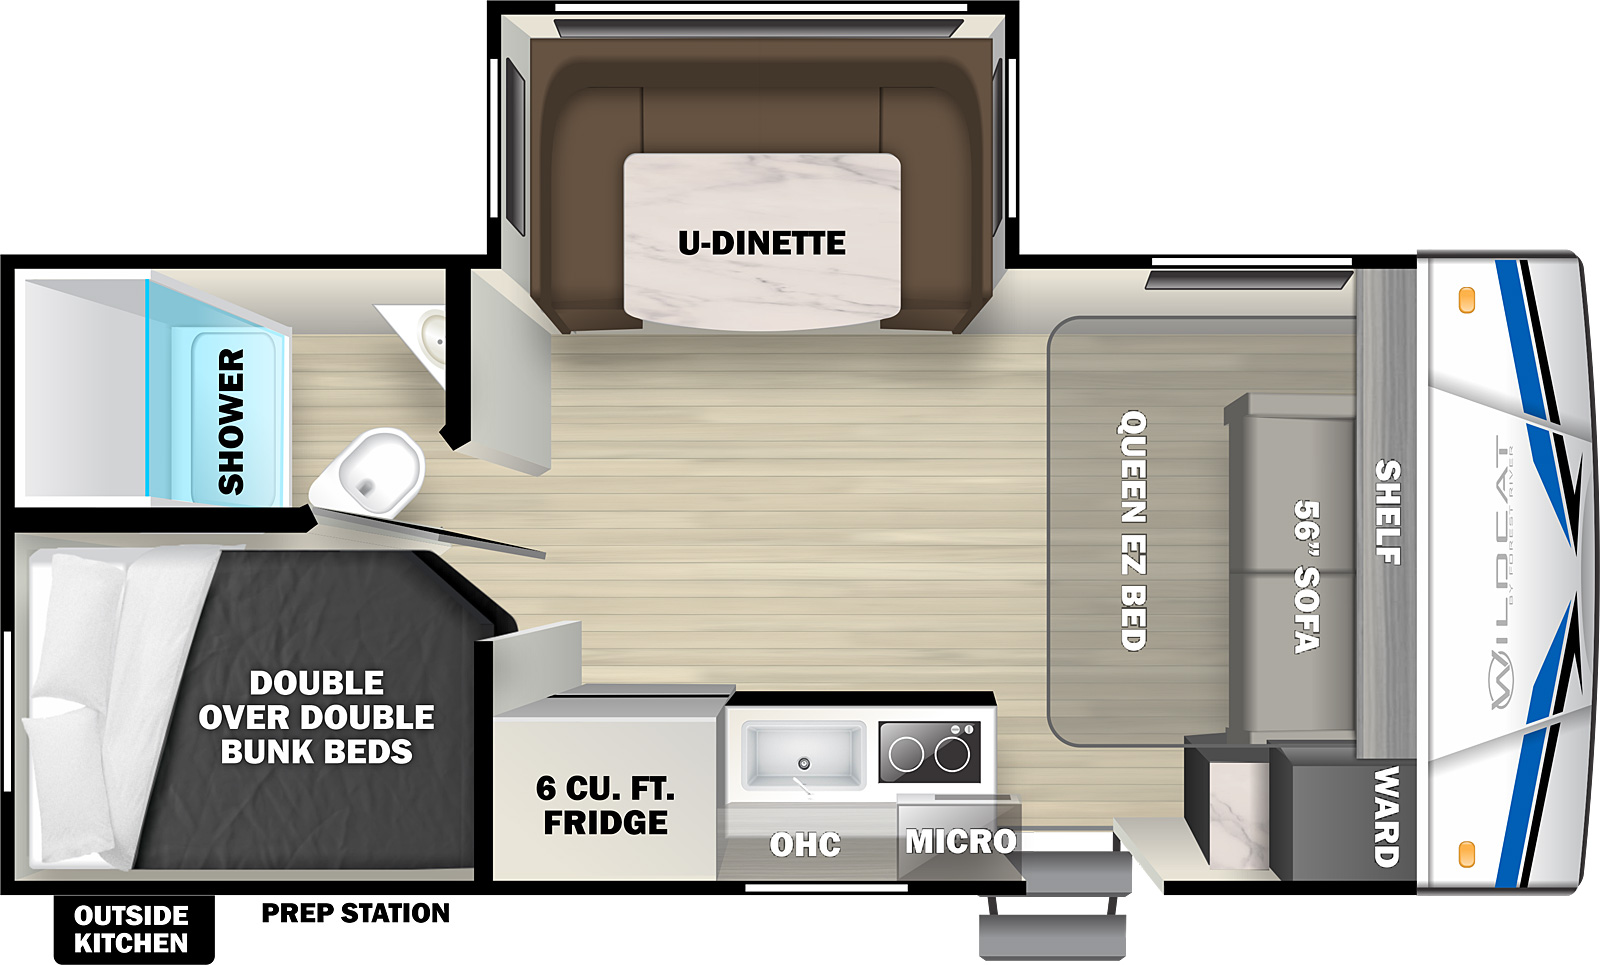 Wildcat Travel Trailers 182DBX floorplan. The 182DBX has one slide out and one entry door.